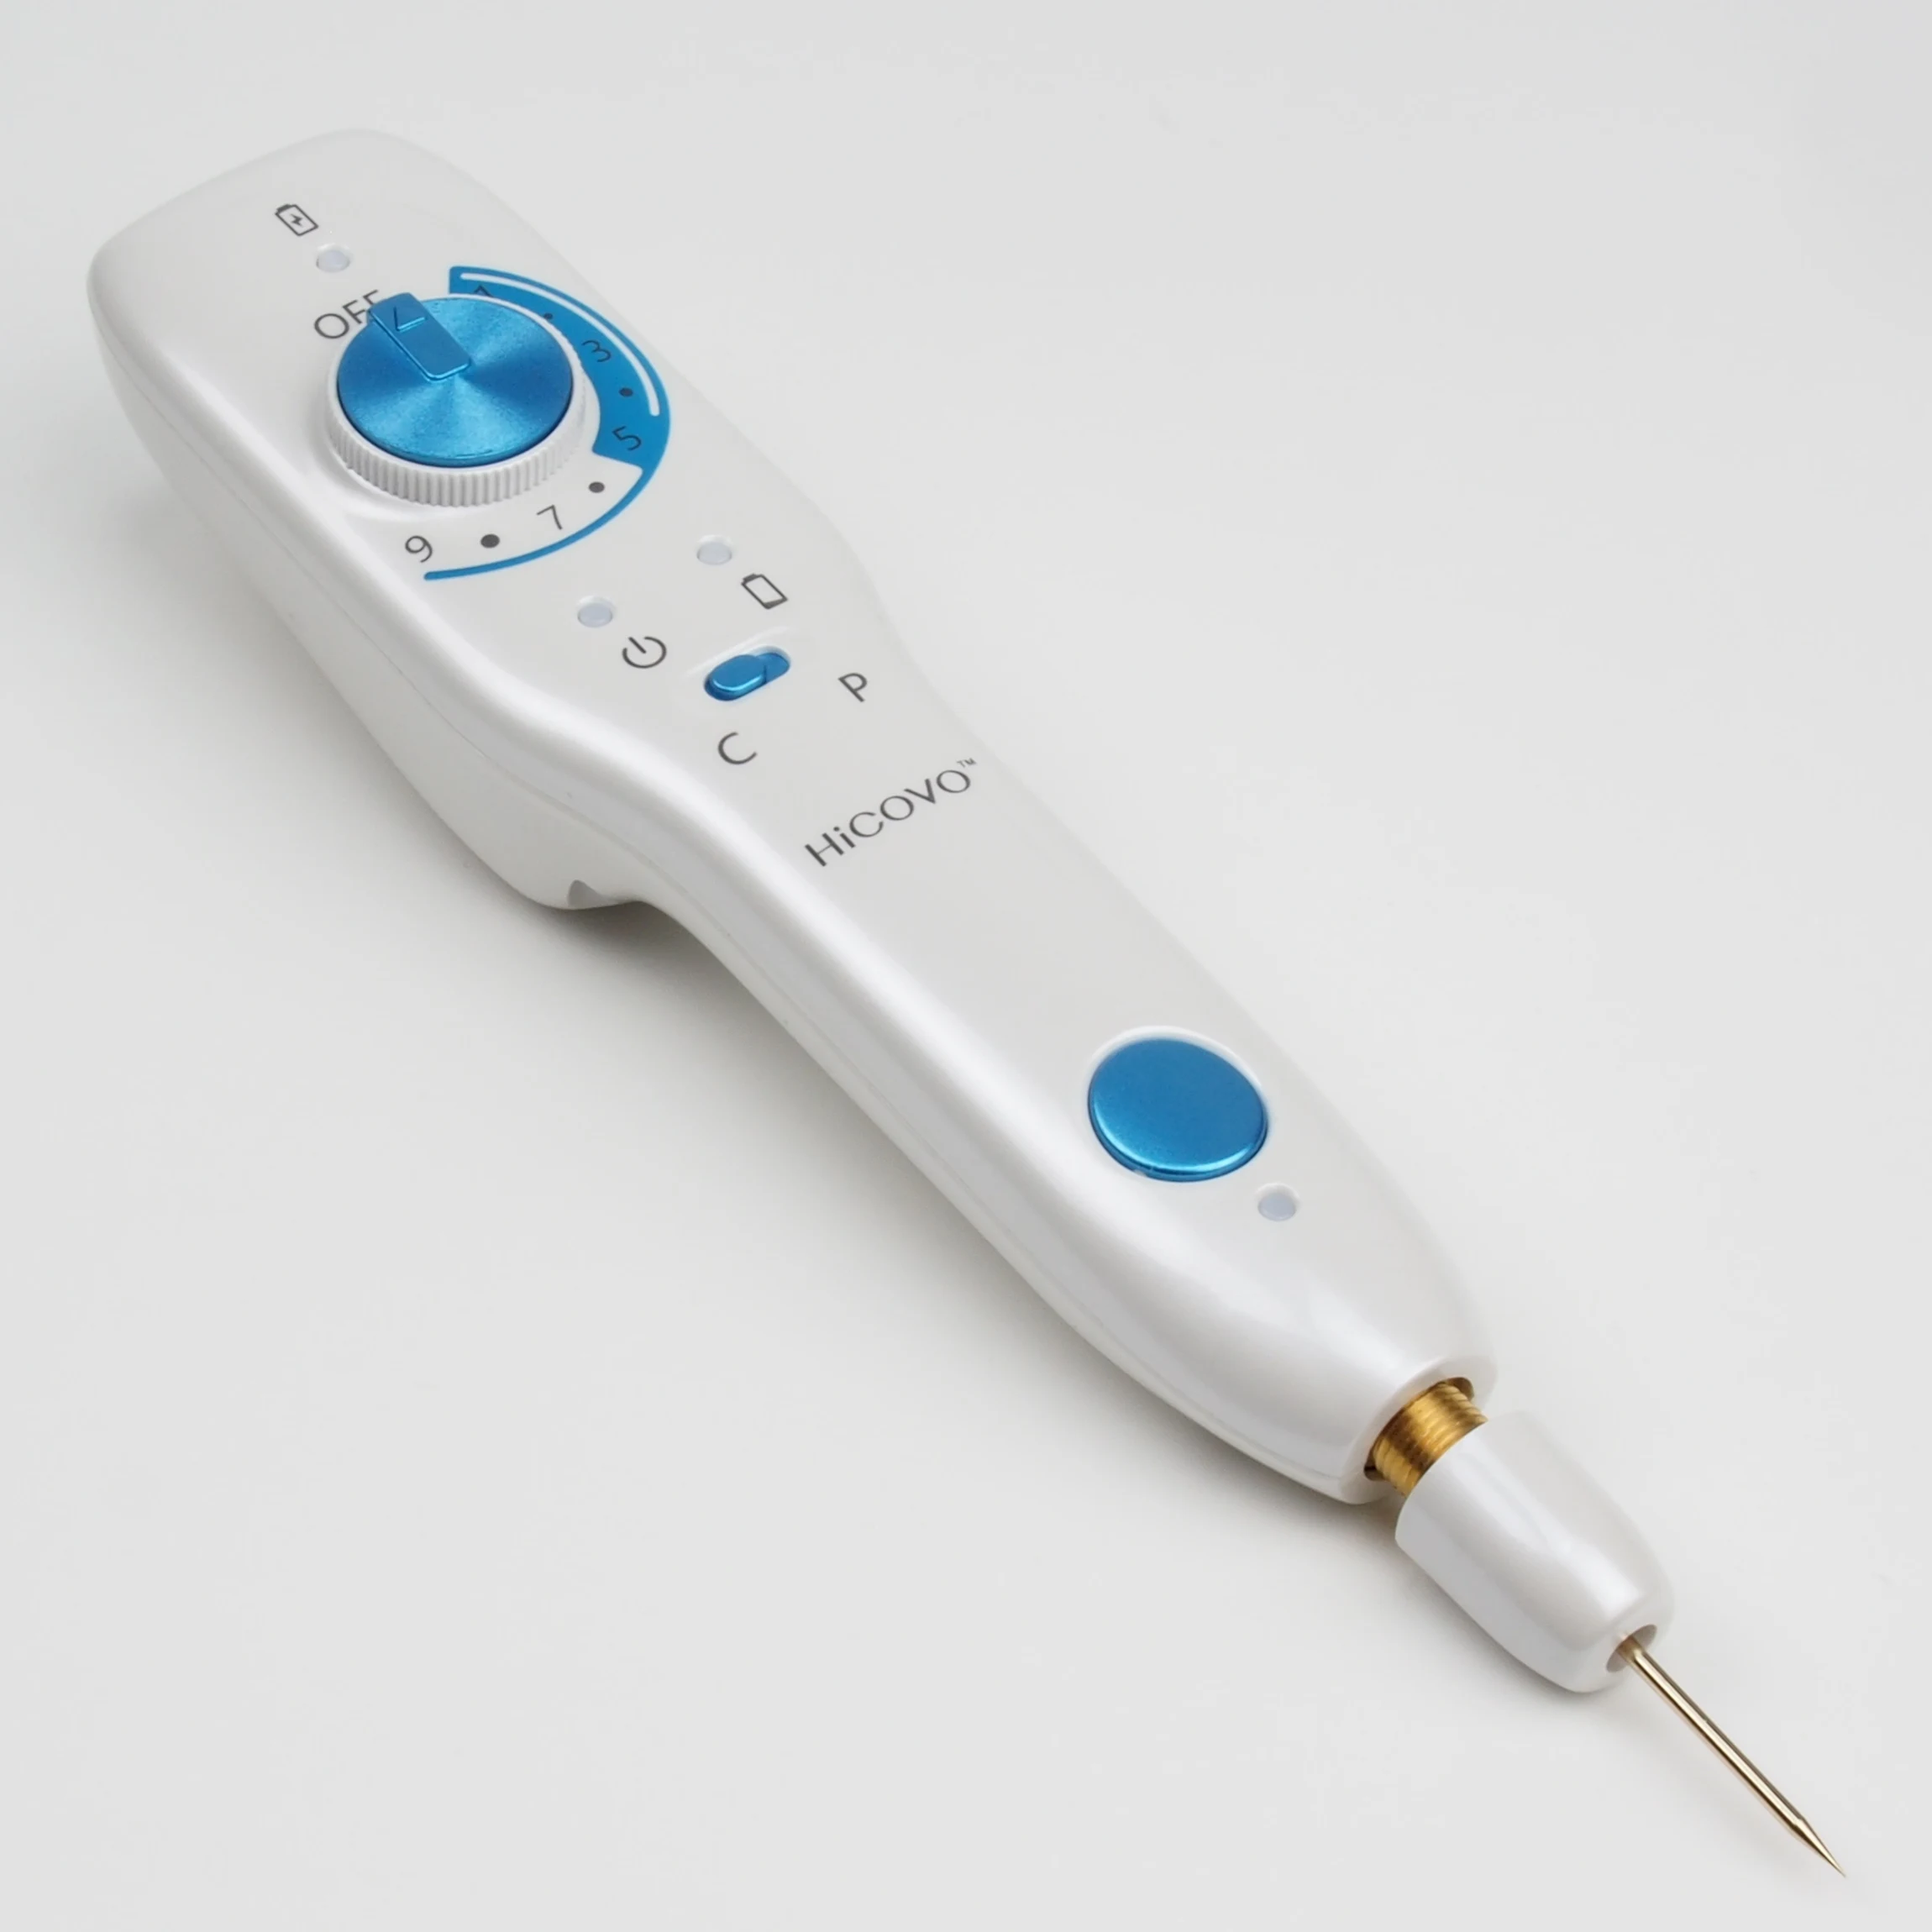 Fibroblast Plamere Neo Plasma Pen for Lift Wrinkle Removal Skin Lifting Mole Remover Eyelid Acne Treatment Machine multi functional electric lift veterinary diagnosis and treatment table